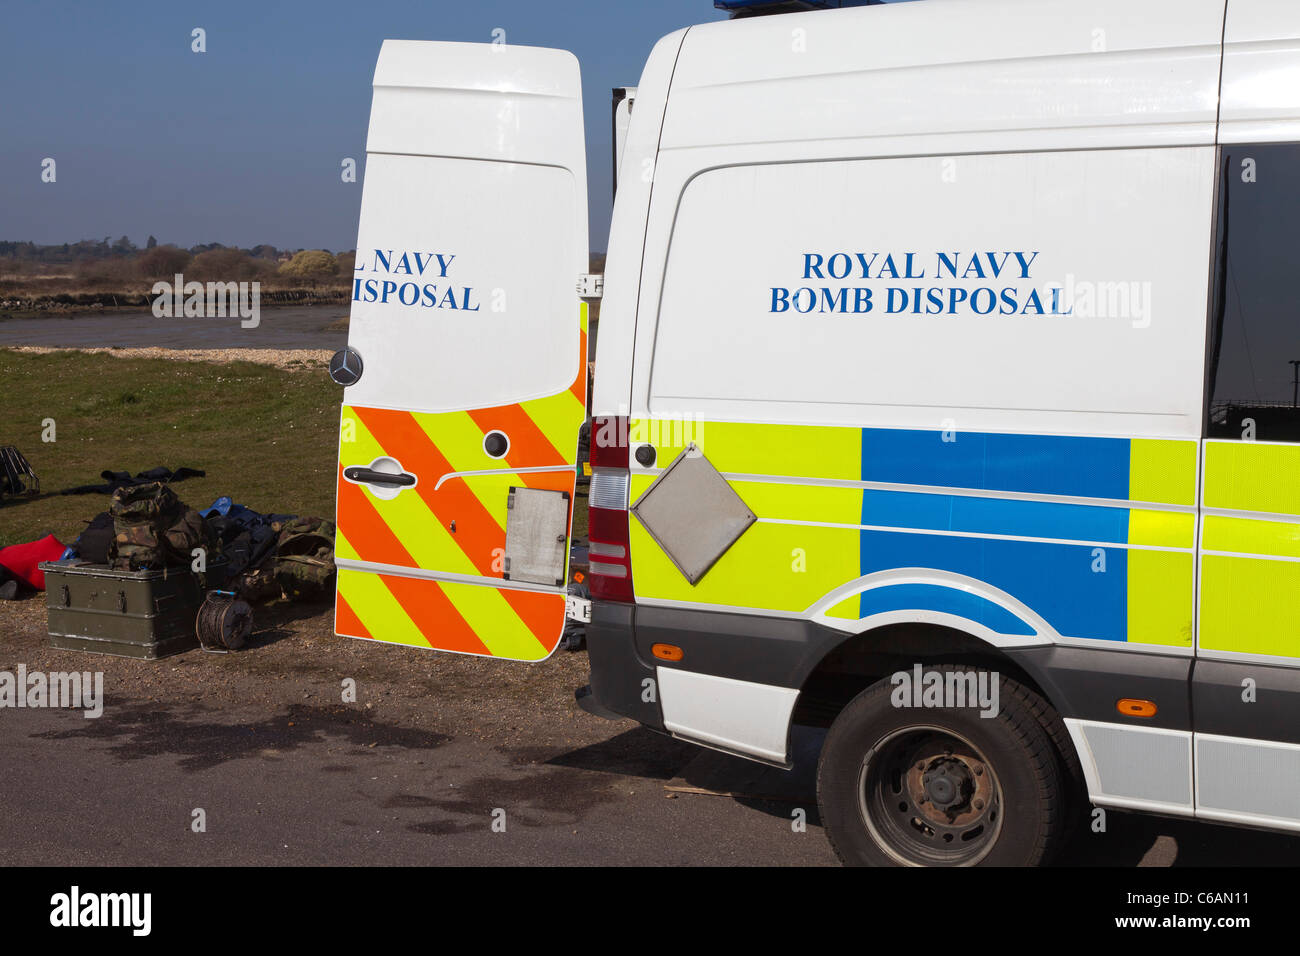 Royal Navy Bomb Disposal vehicle van emergency response diffuse make safe blow up professional army trained secure Stock Photo